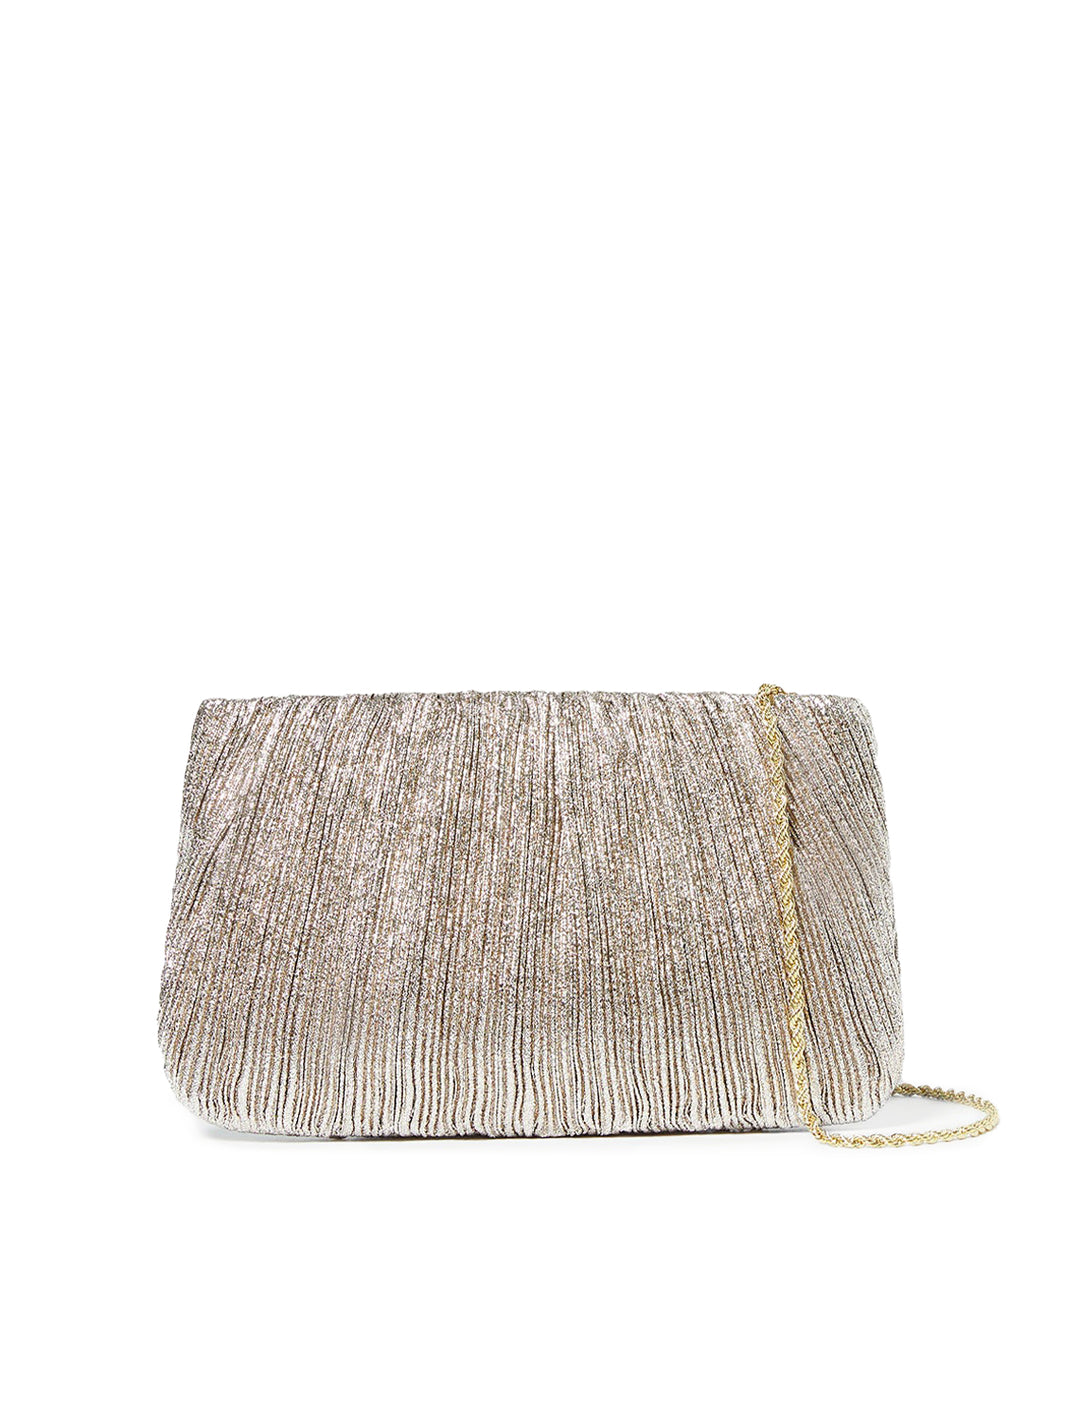 Front view of Loeffler Randall's brit flat pleated pouch in champagne.